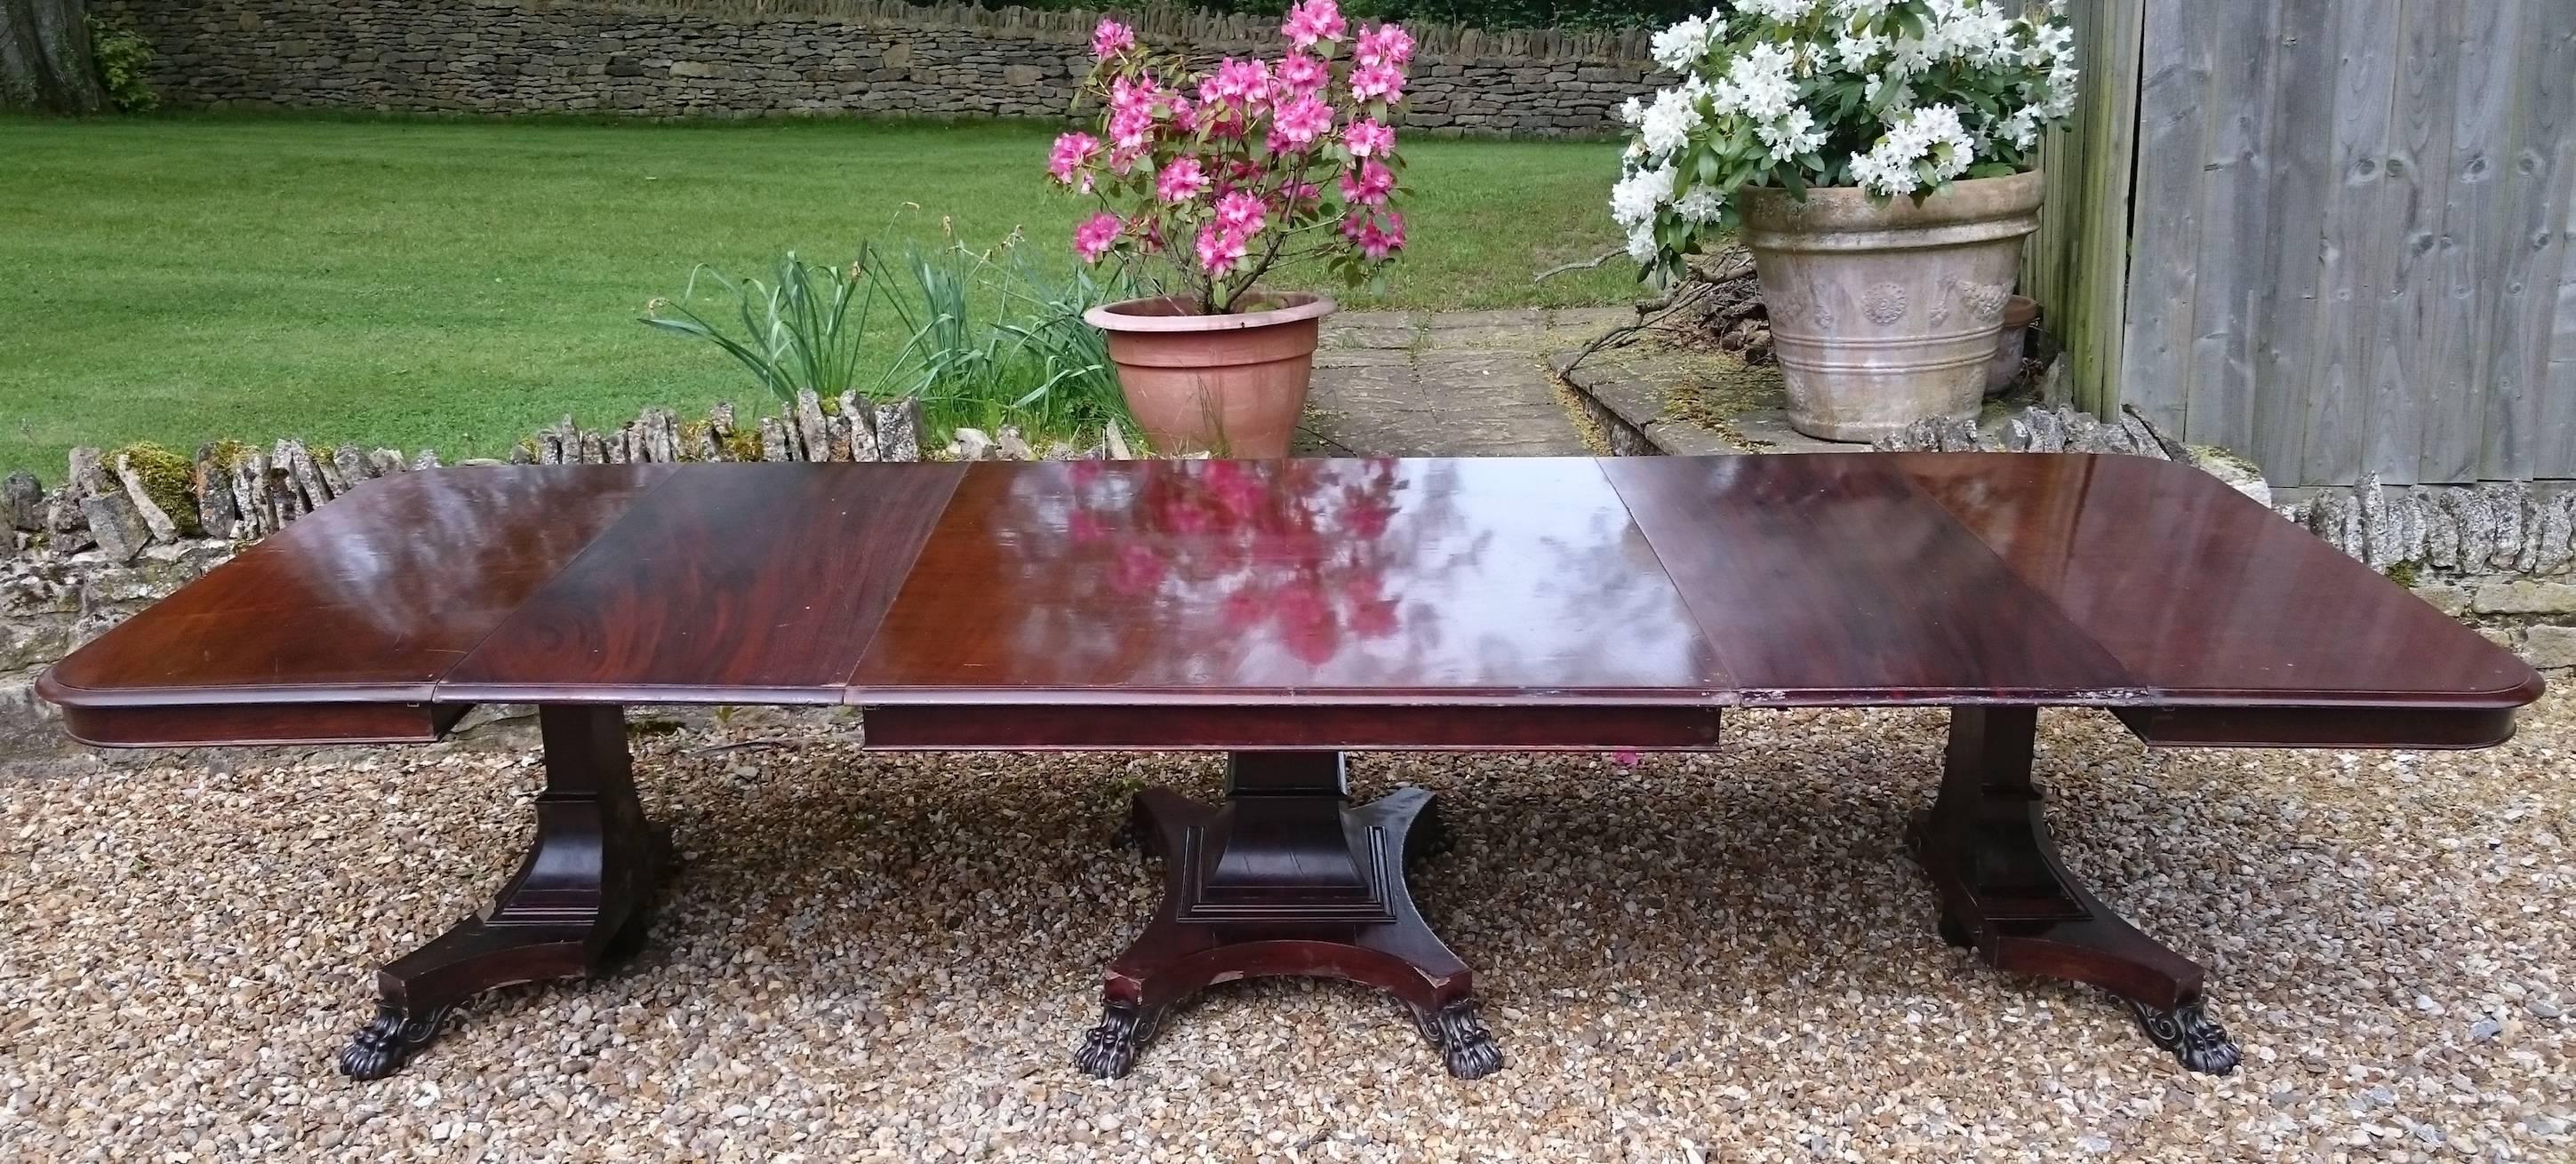 19th century three pedestal antique dining table with two removable leaves. This is a very finely constructed dining table and it is made from a choice cut of mahogany. This is a very flexible table as the two end tables have the ability to be put